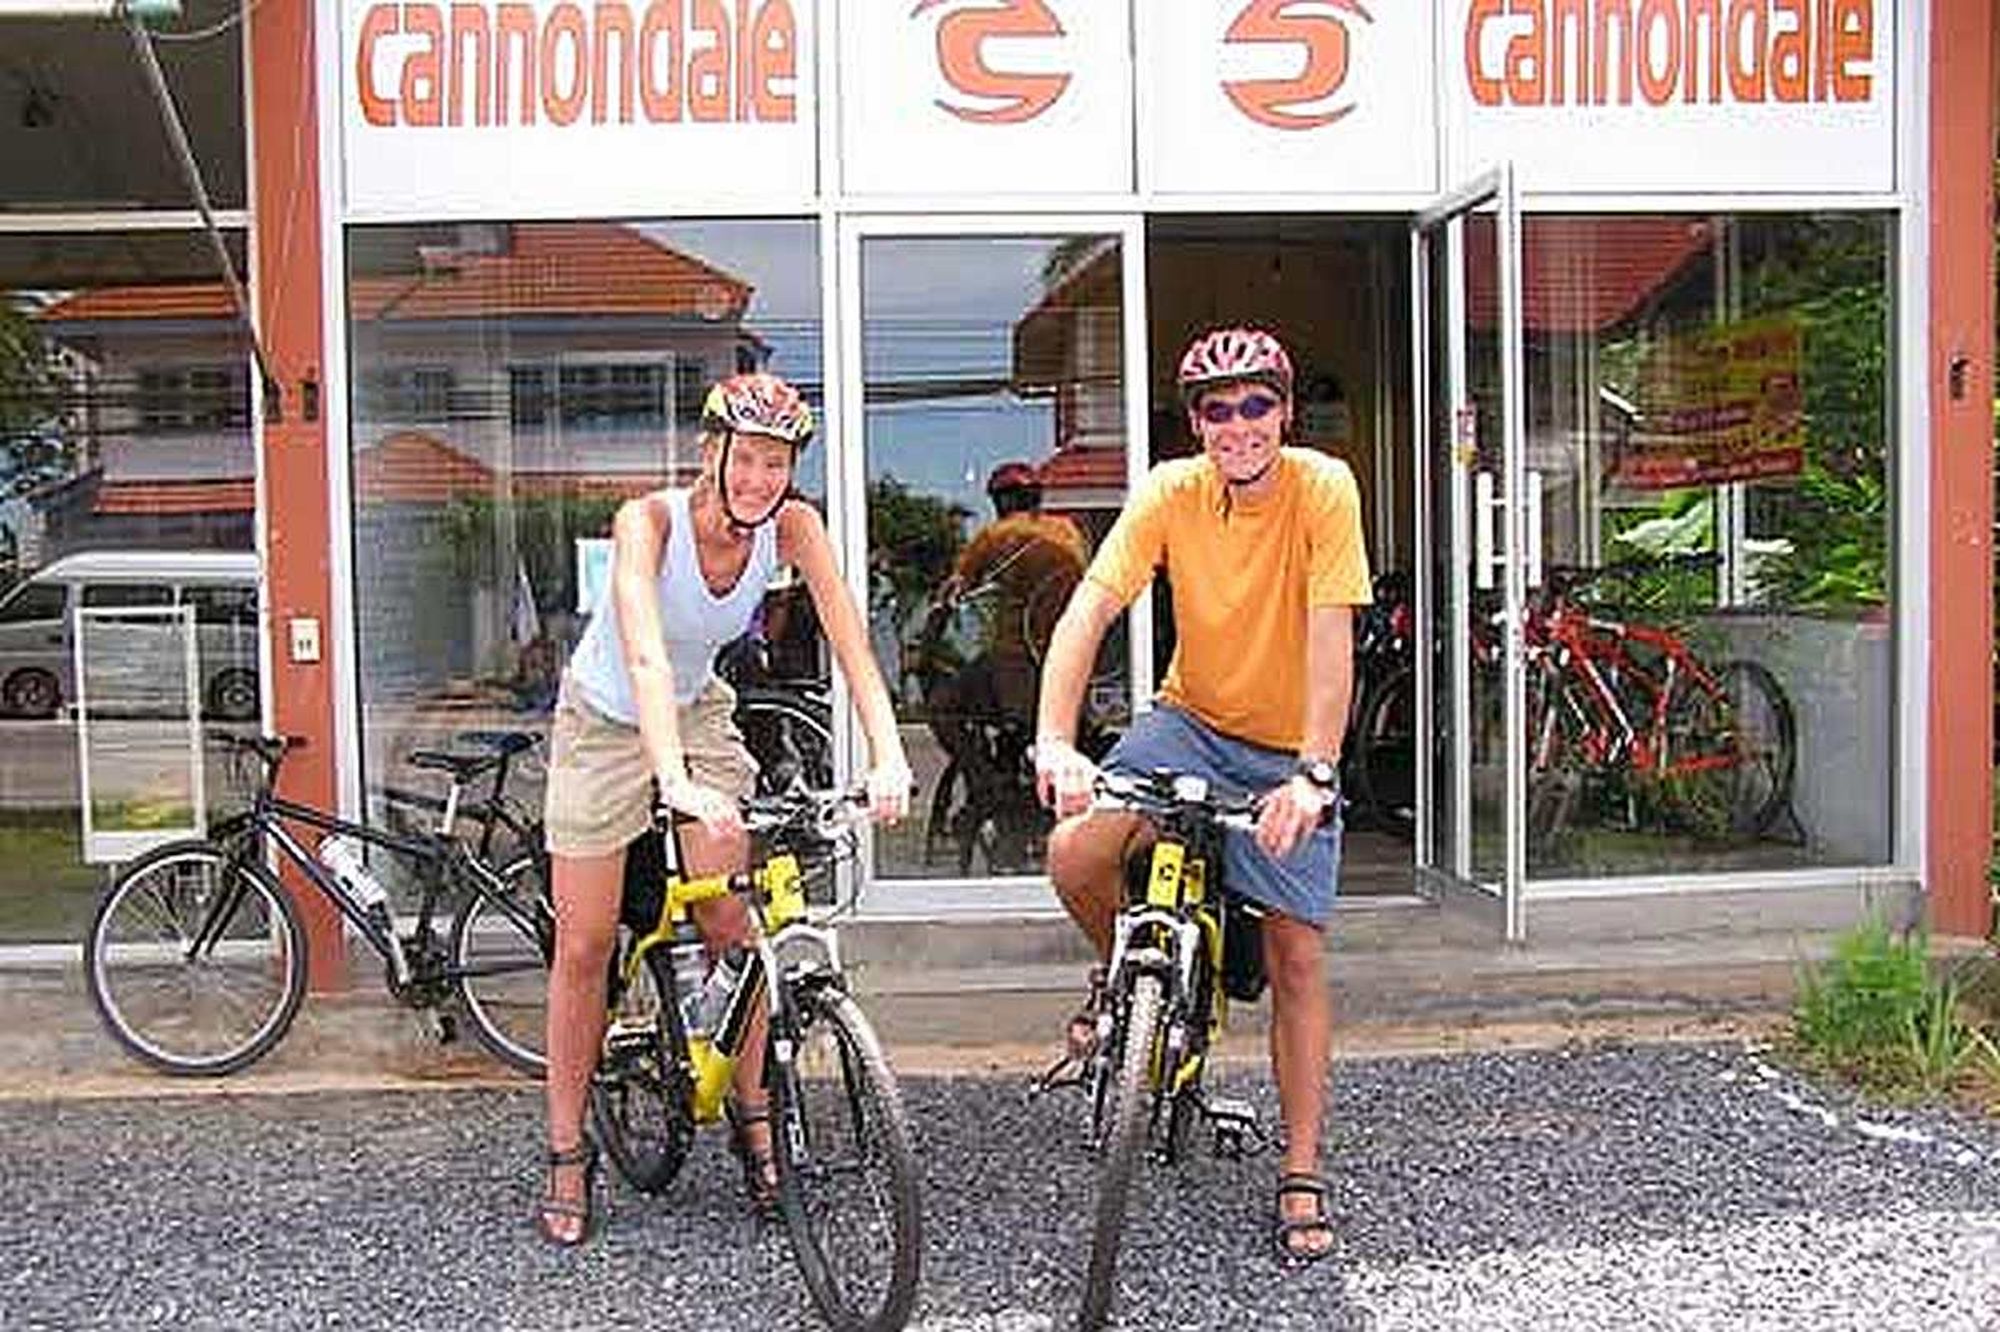 On a whim this couple bought two yellow Cannondale Bicycles from us and rode down q9tA3fR